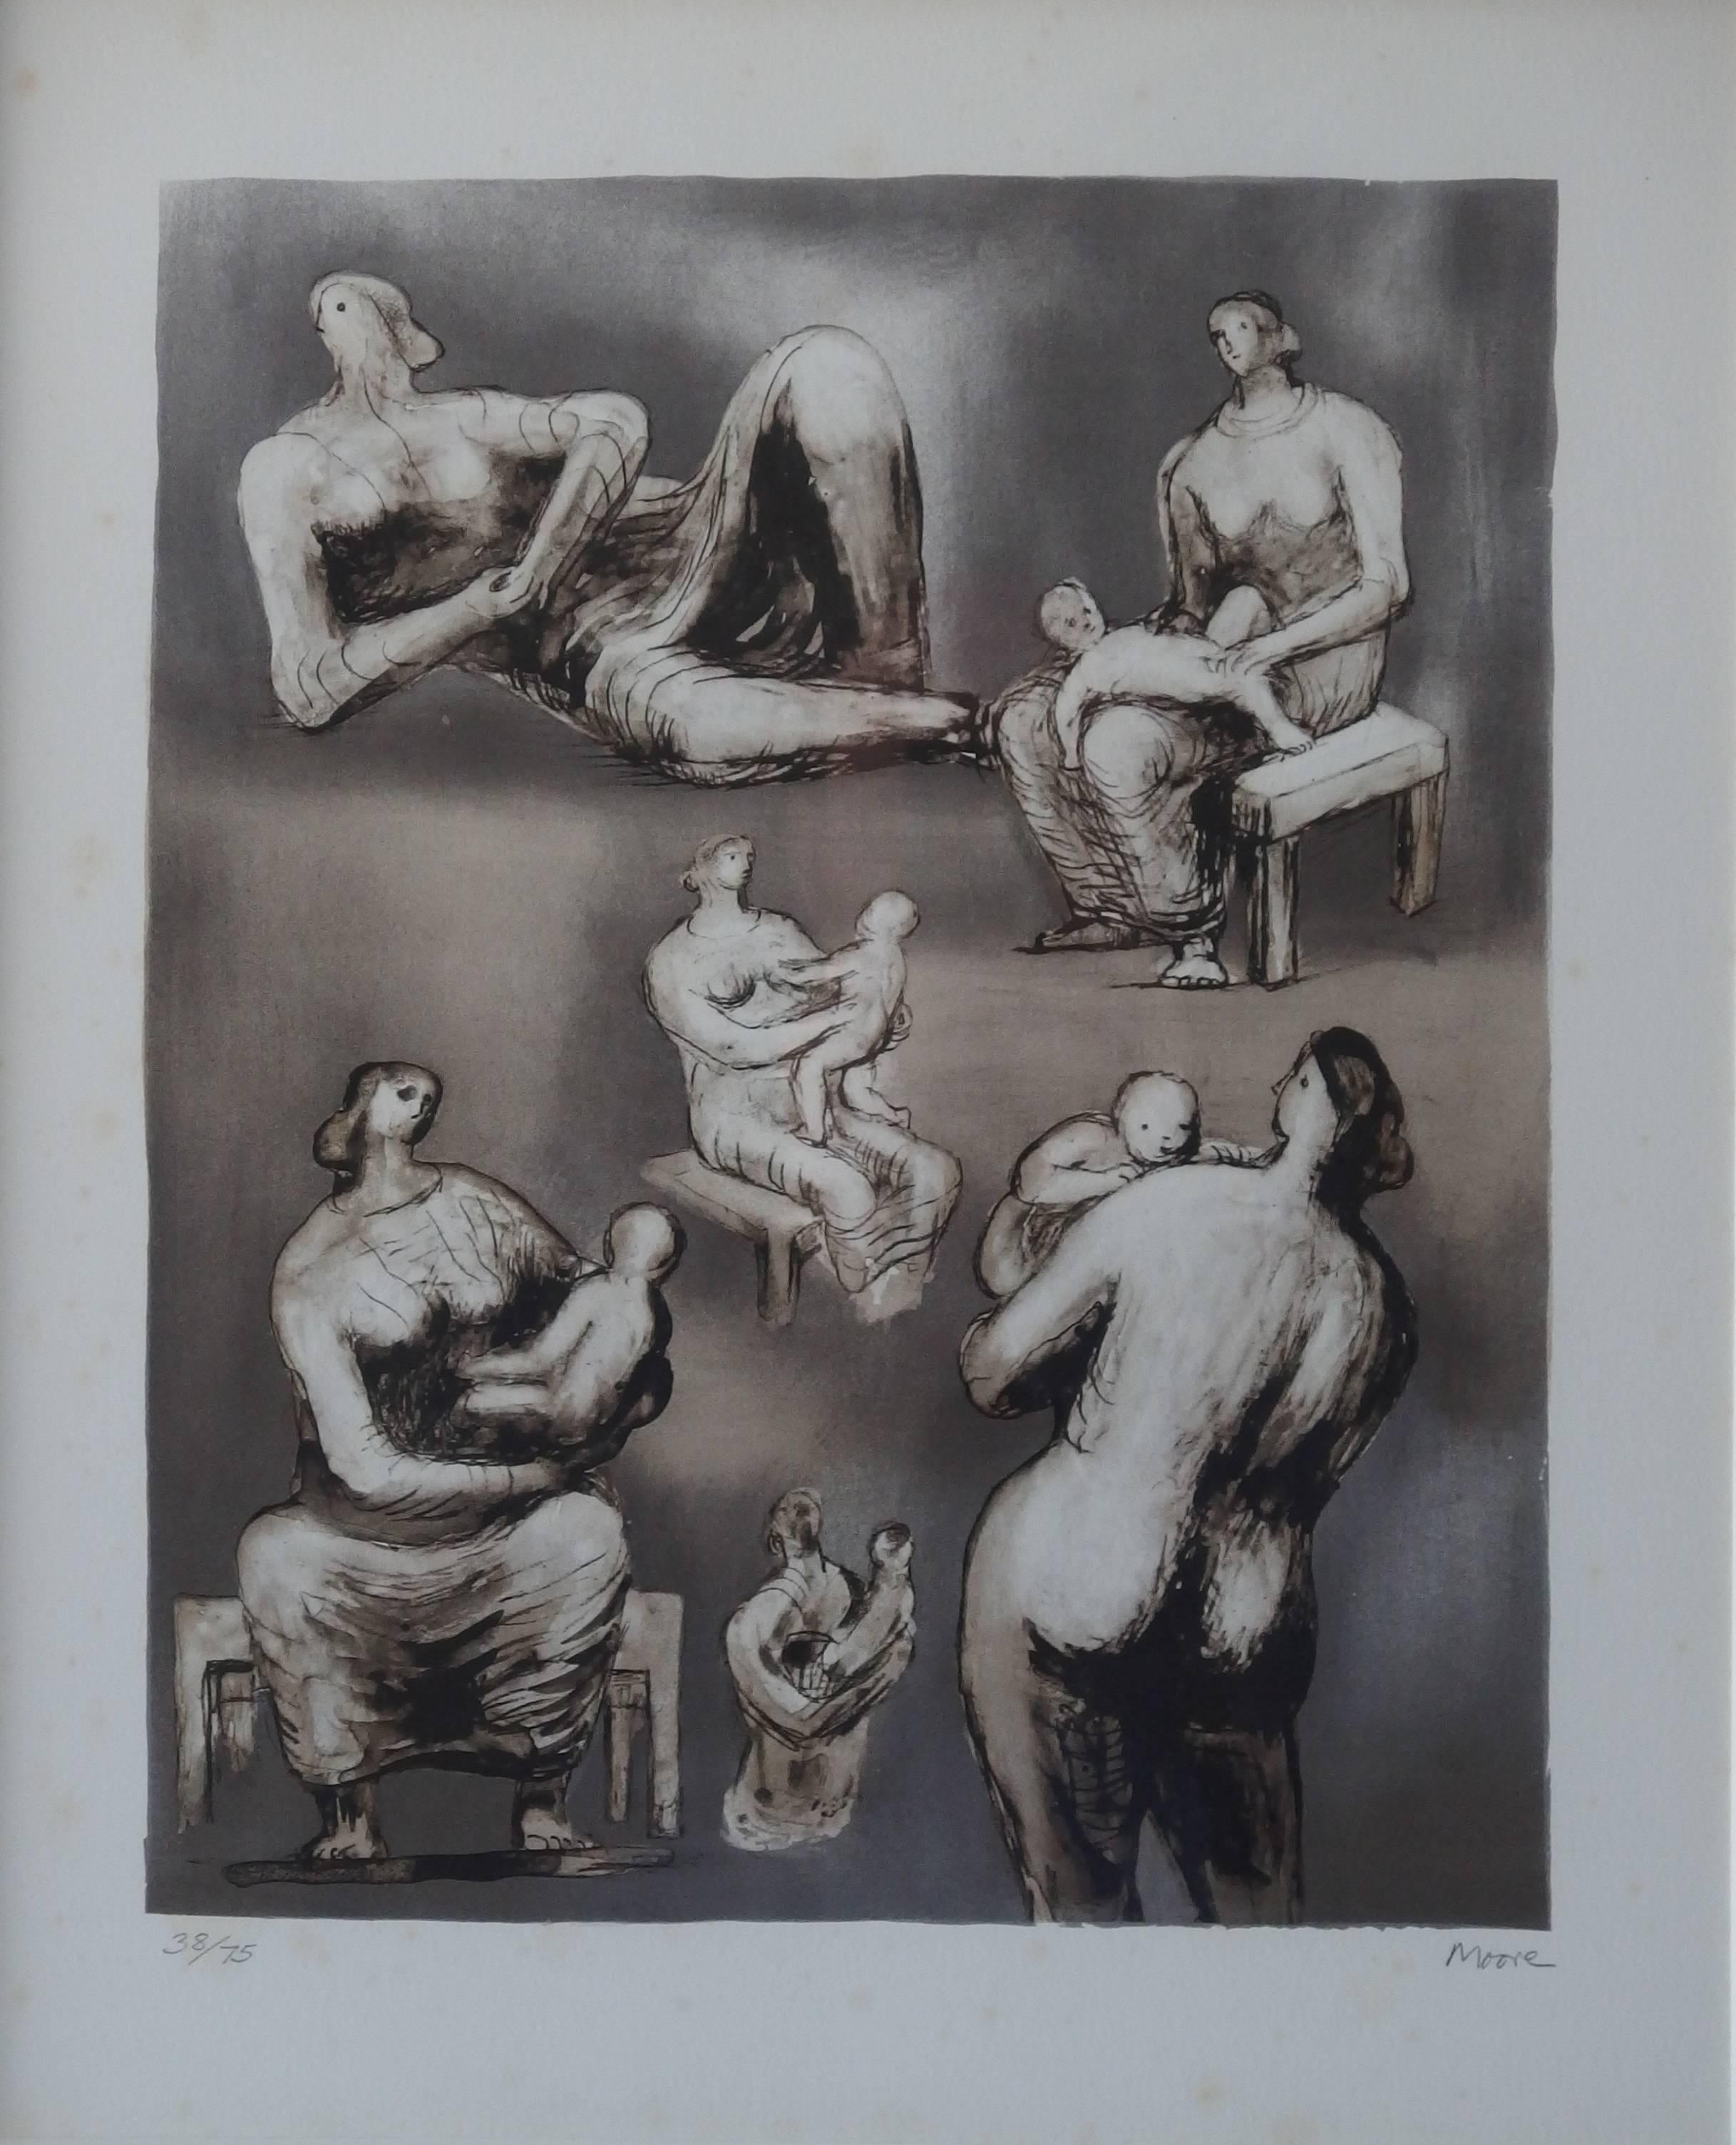 Henry Moore Figurative Print - Mother and Child Studies - Original Handsigned Lithograph - 75 copies